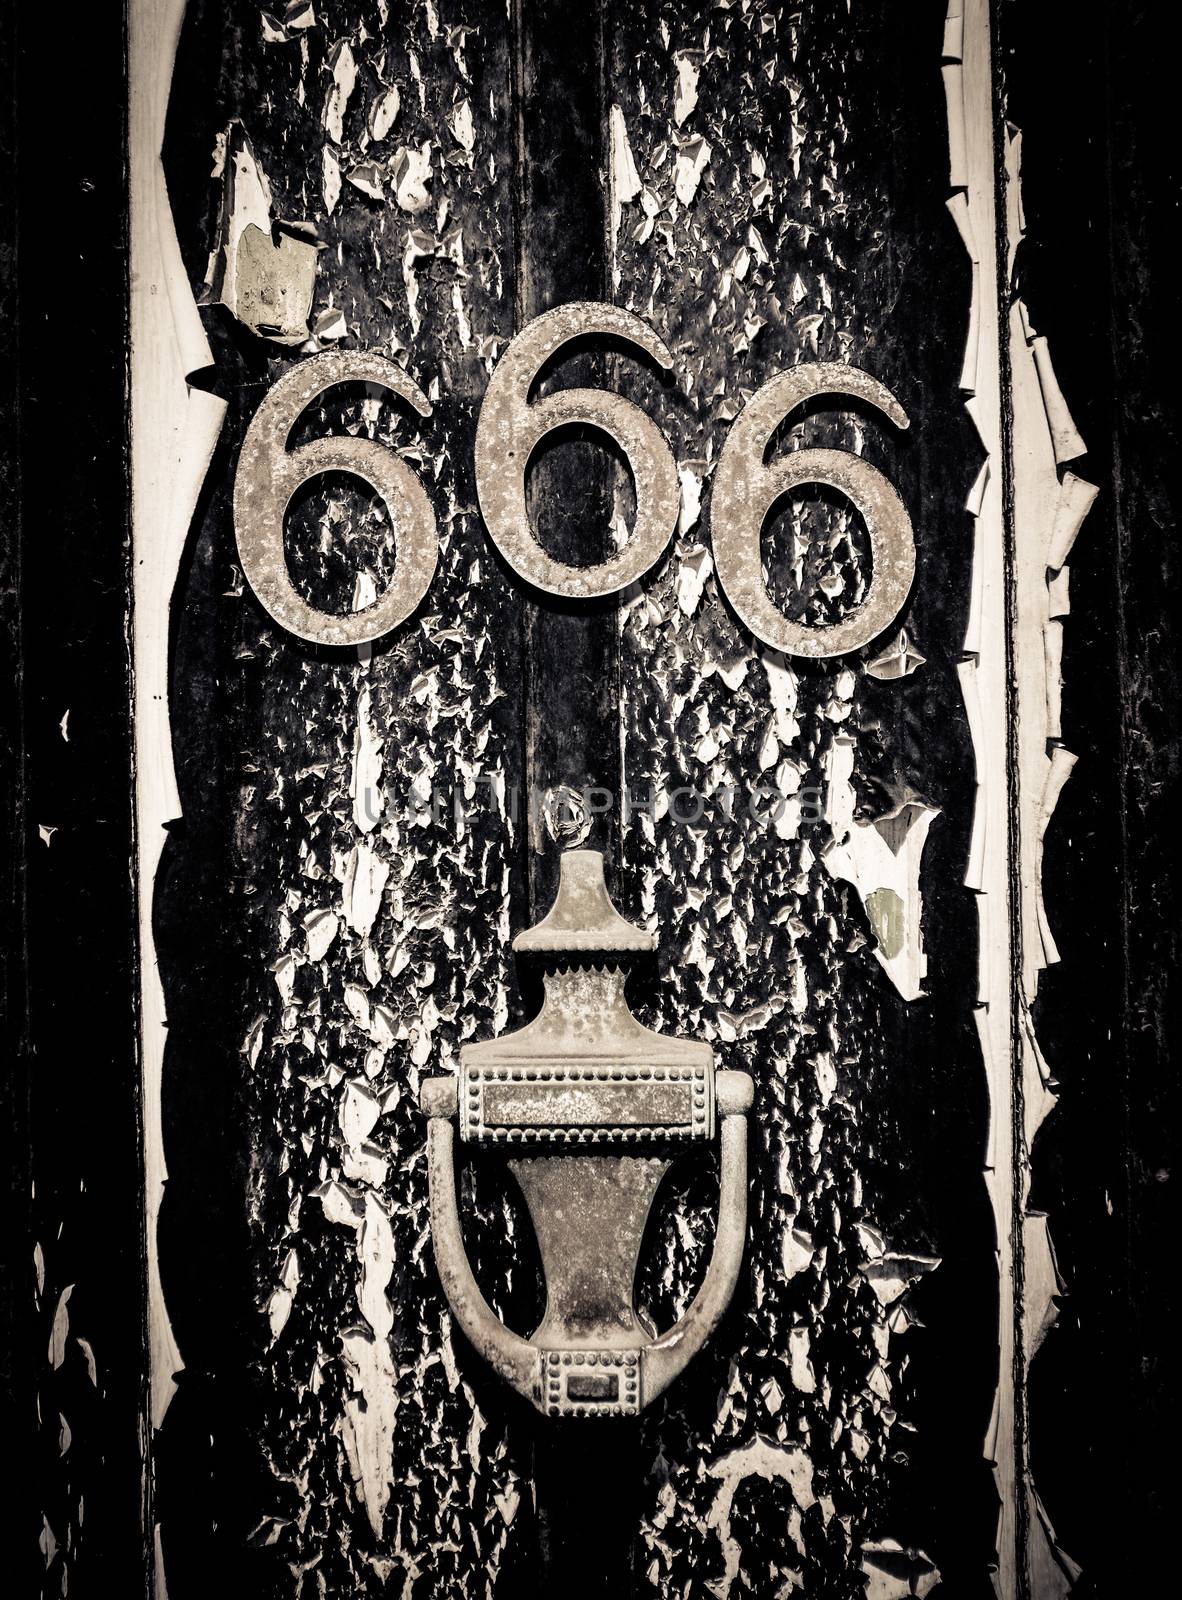 A Scary Door With The Number 666 And Black Peeling Paint For Halloween